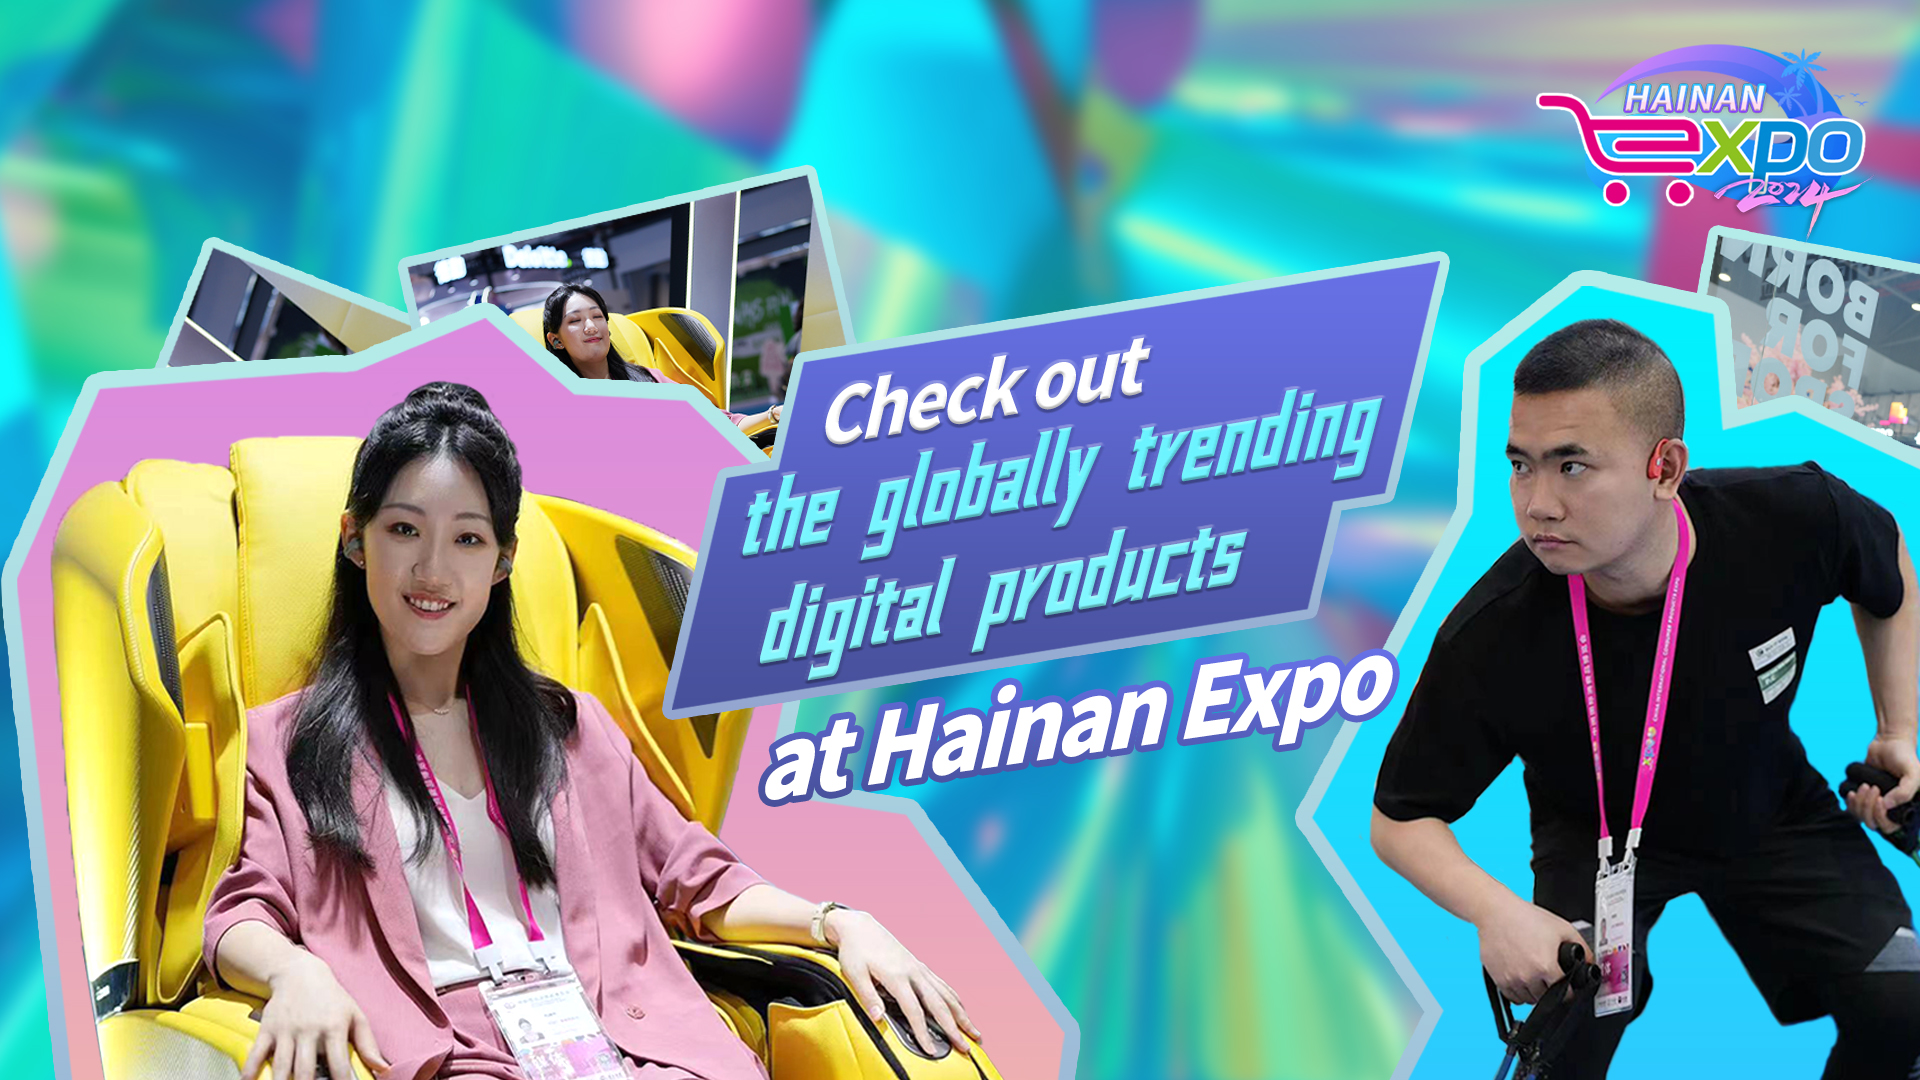 Live: Check out trending digital products at Hainan Expo